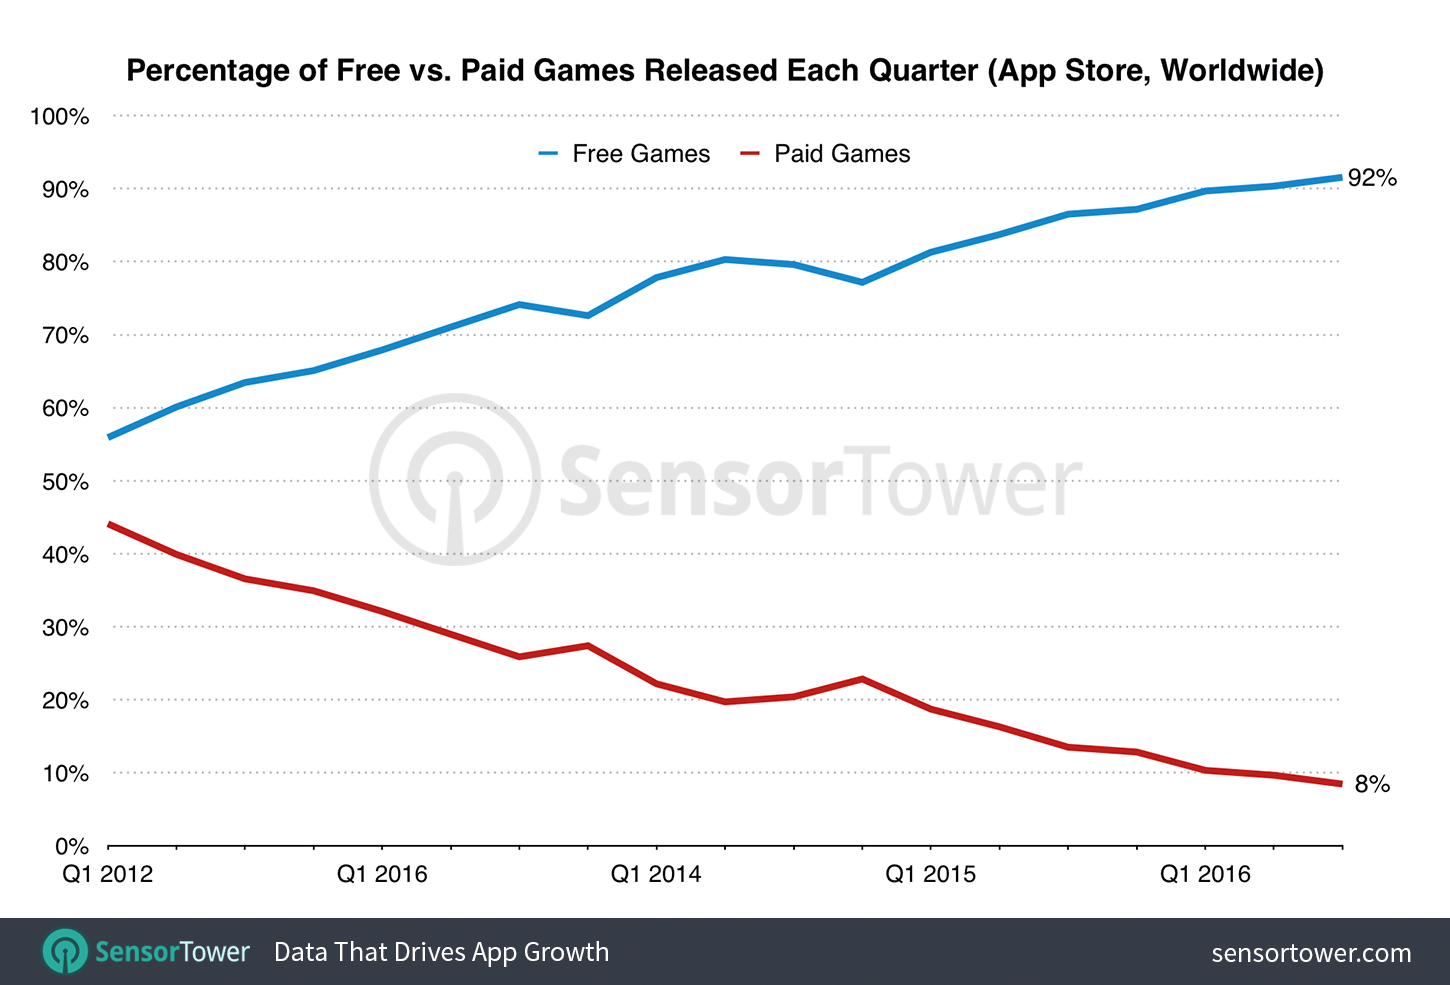 Percentage of Free vs. Paid Games Released Each Quarter Since 2012 on the U.S. App Store